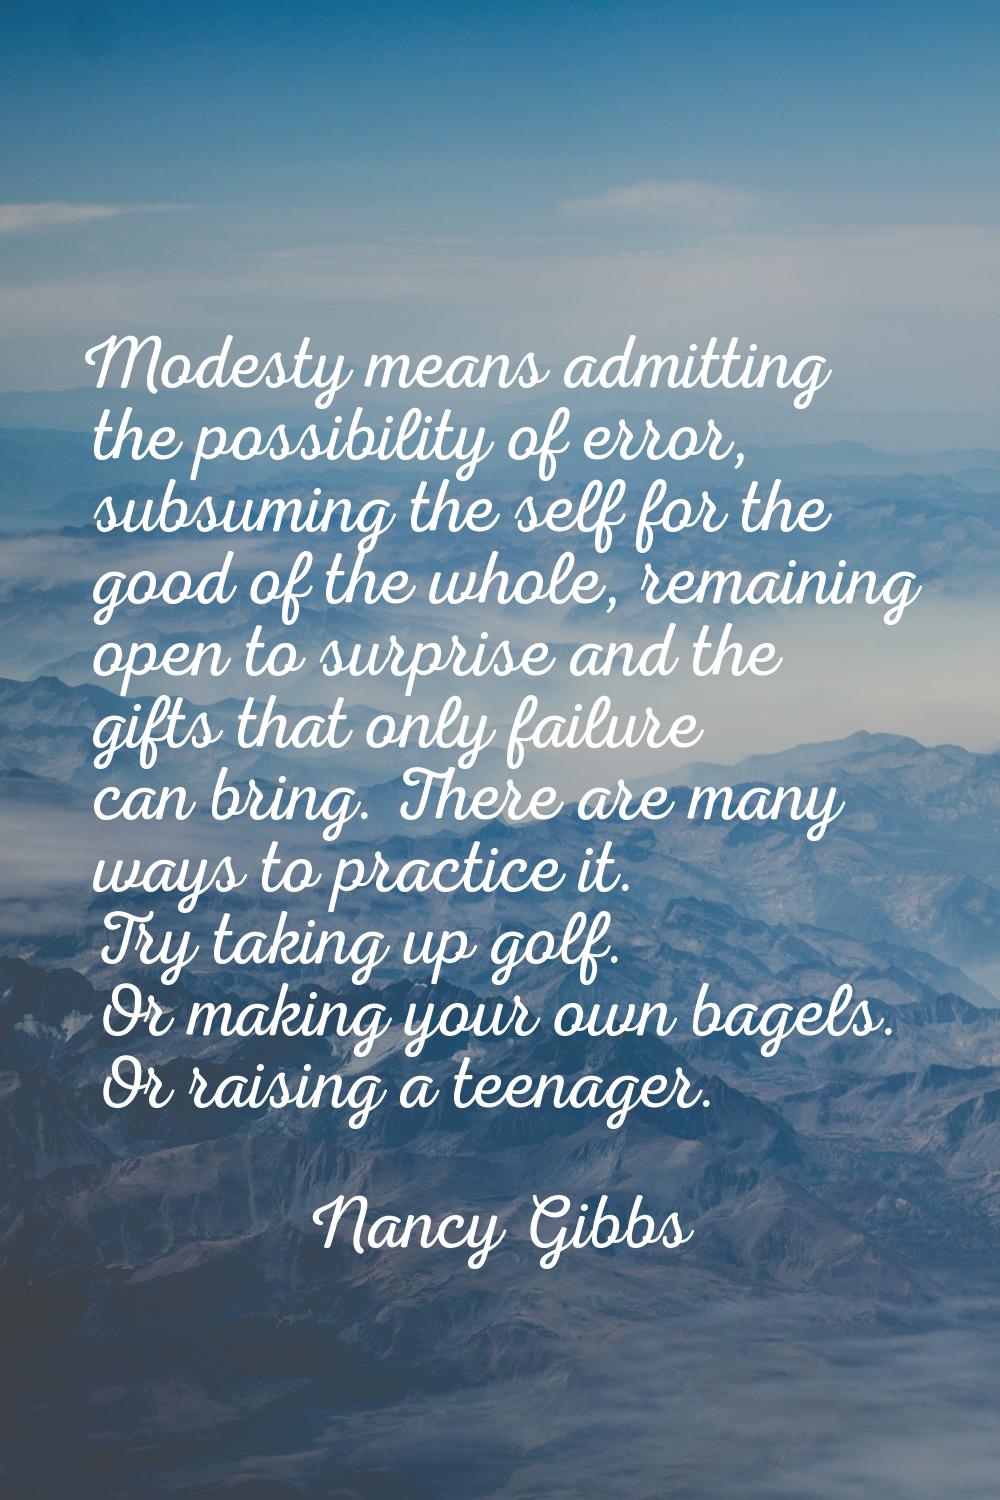 Modesty means admitting the possibility of error, subsuming the self for the good of the whole, rem